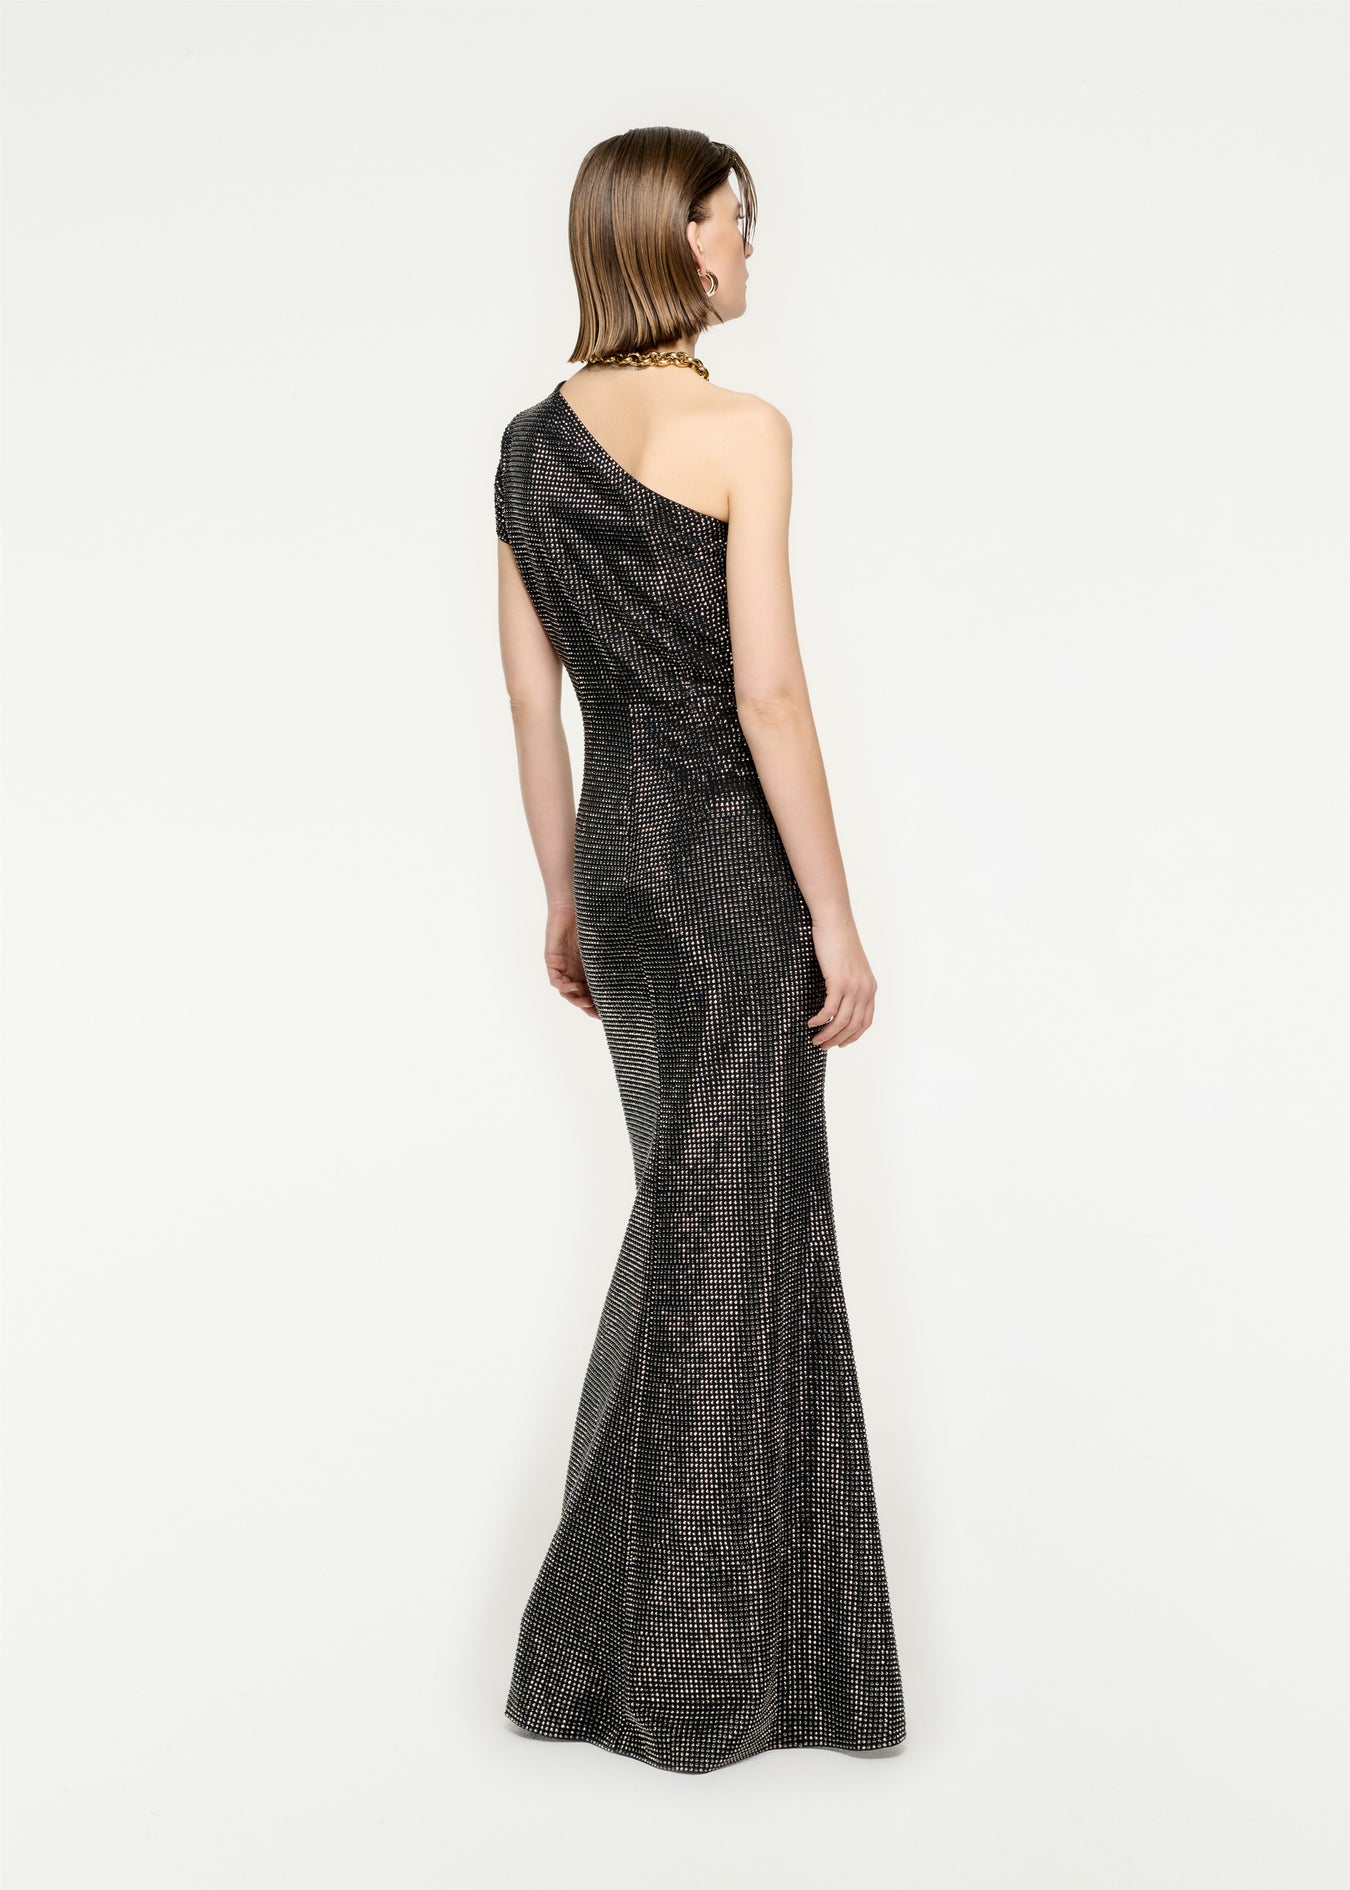 The back of a woman wearing the Asymmetric Diamante Maxi Dress in Black